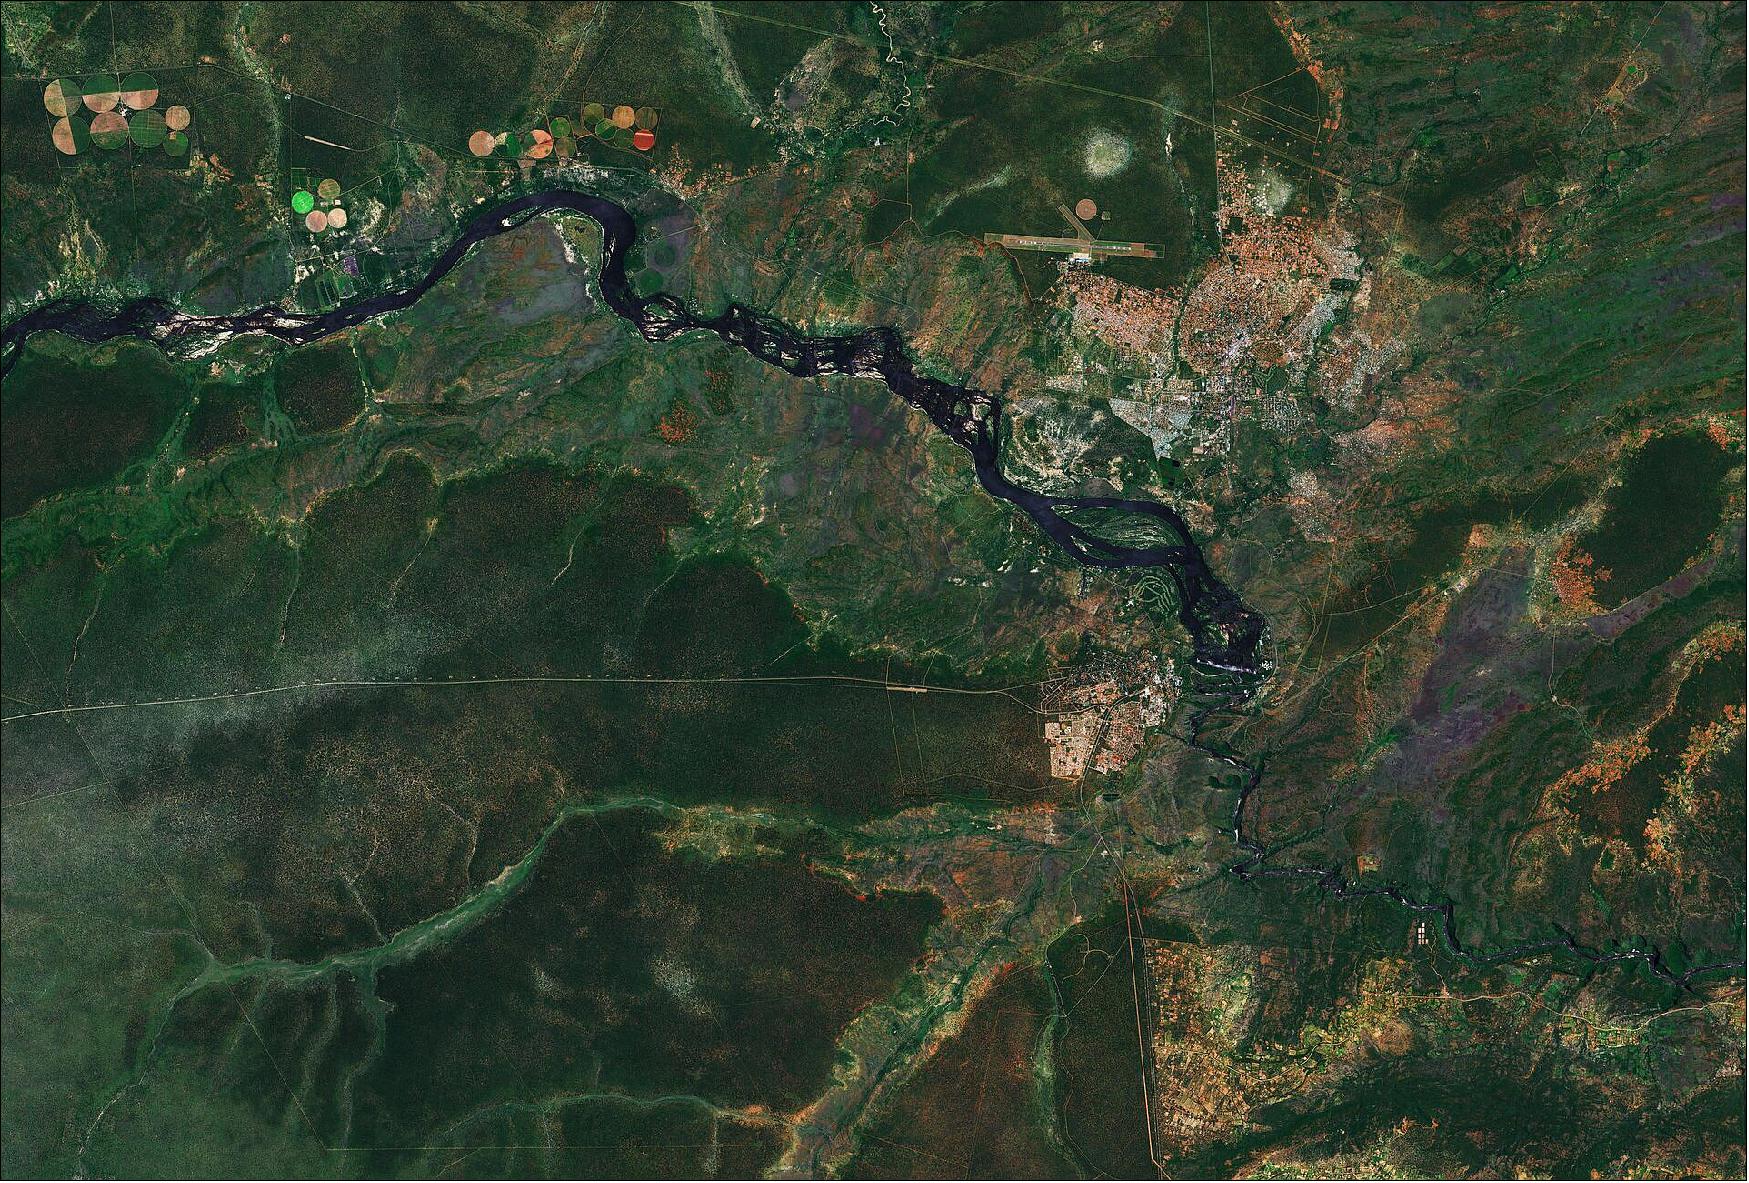 Figure 56: In this image, captured on 22 February 2019, the river cuts from left to right in the image before plunging over Victoria Falls – visible as a white line in the image. While it is neither the highest nor the widest waterfall in the world, Victoria Falls has a width of around 1700 m and a height of over 100 m which classifies it as the world’s largest sheet of falling water. This image is also featured on the Earth from Space video program (image credit: ESA, the image contains modified Copernicus Sentinel data (2019), processed by ESA)